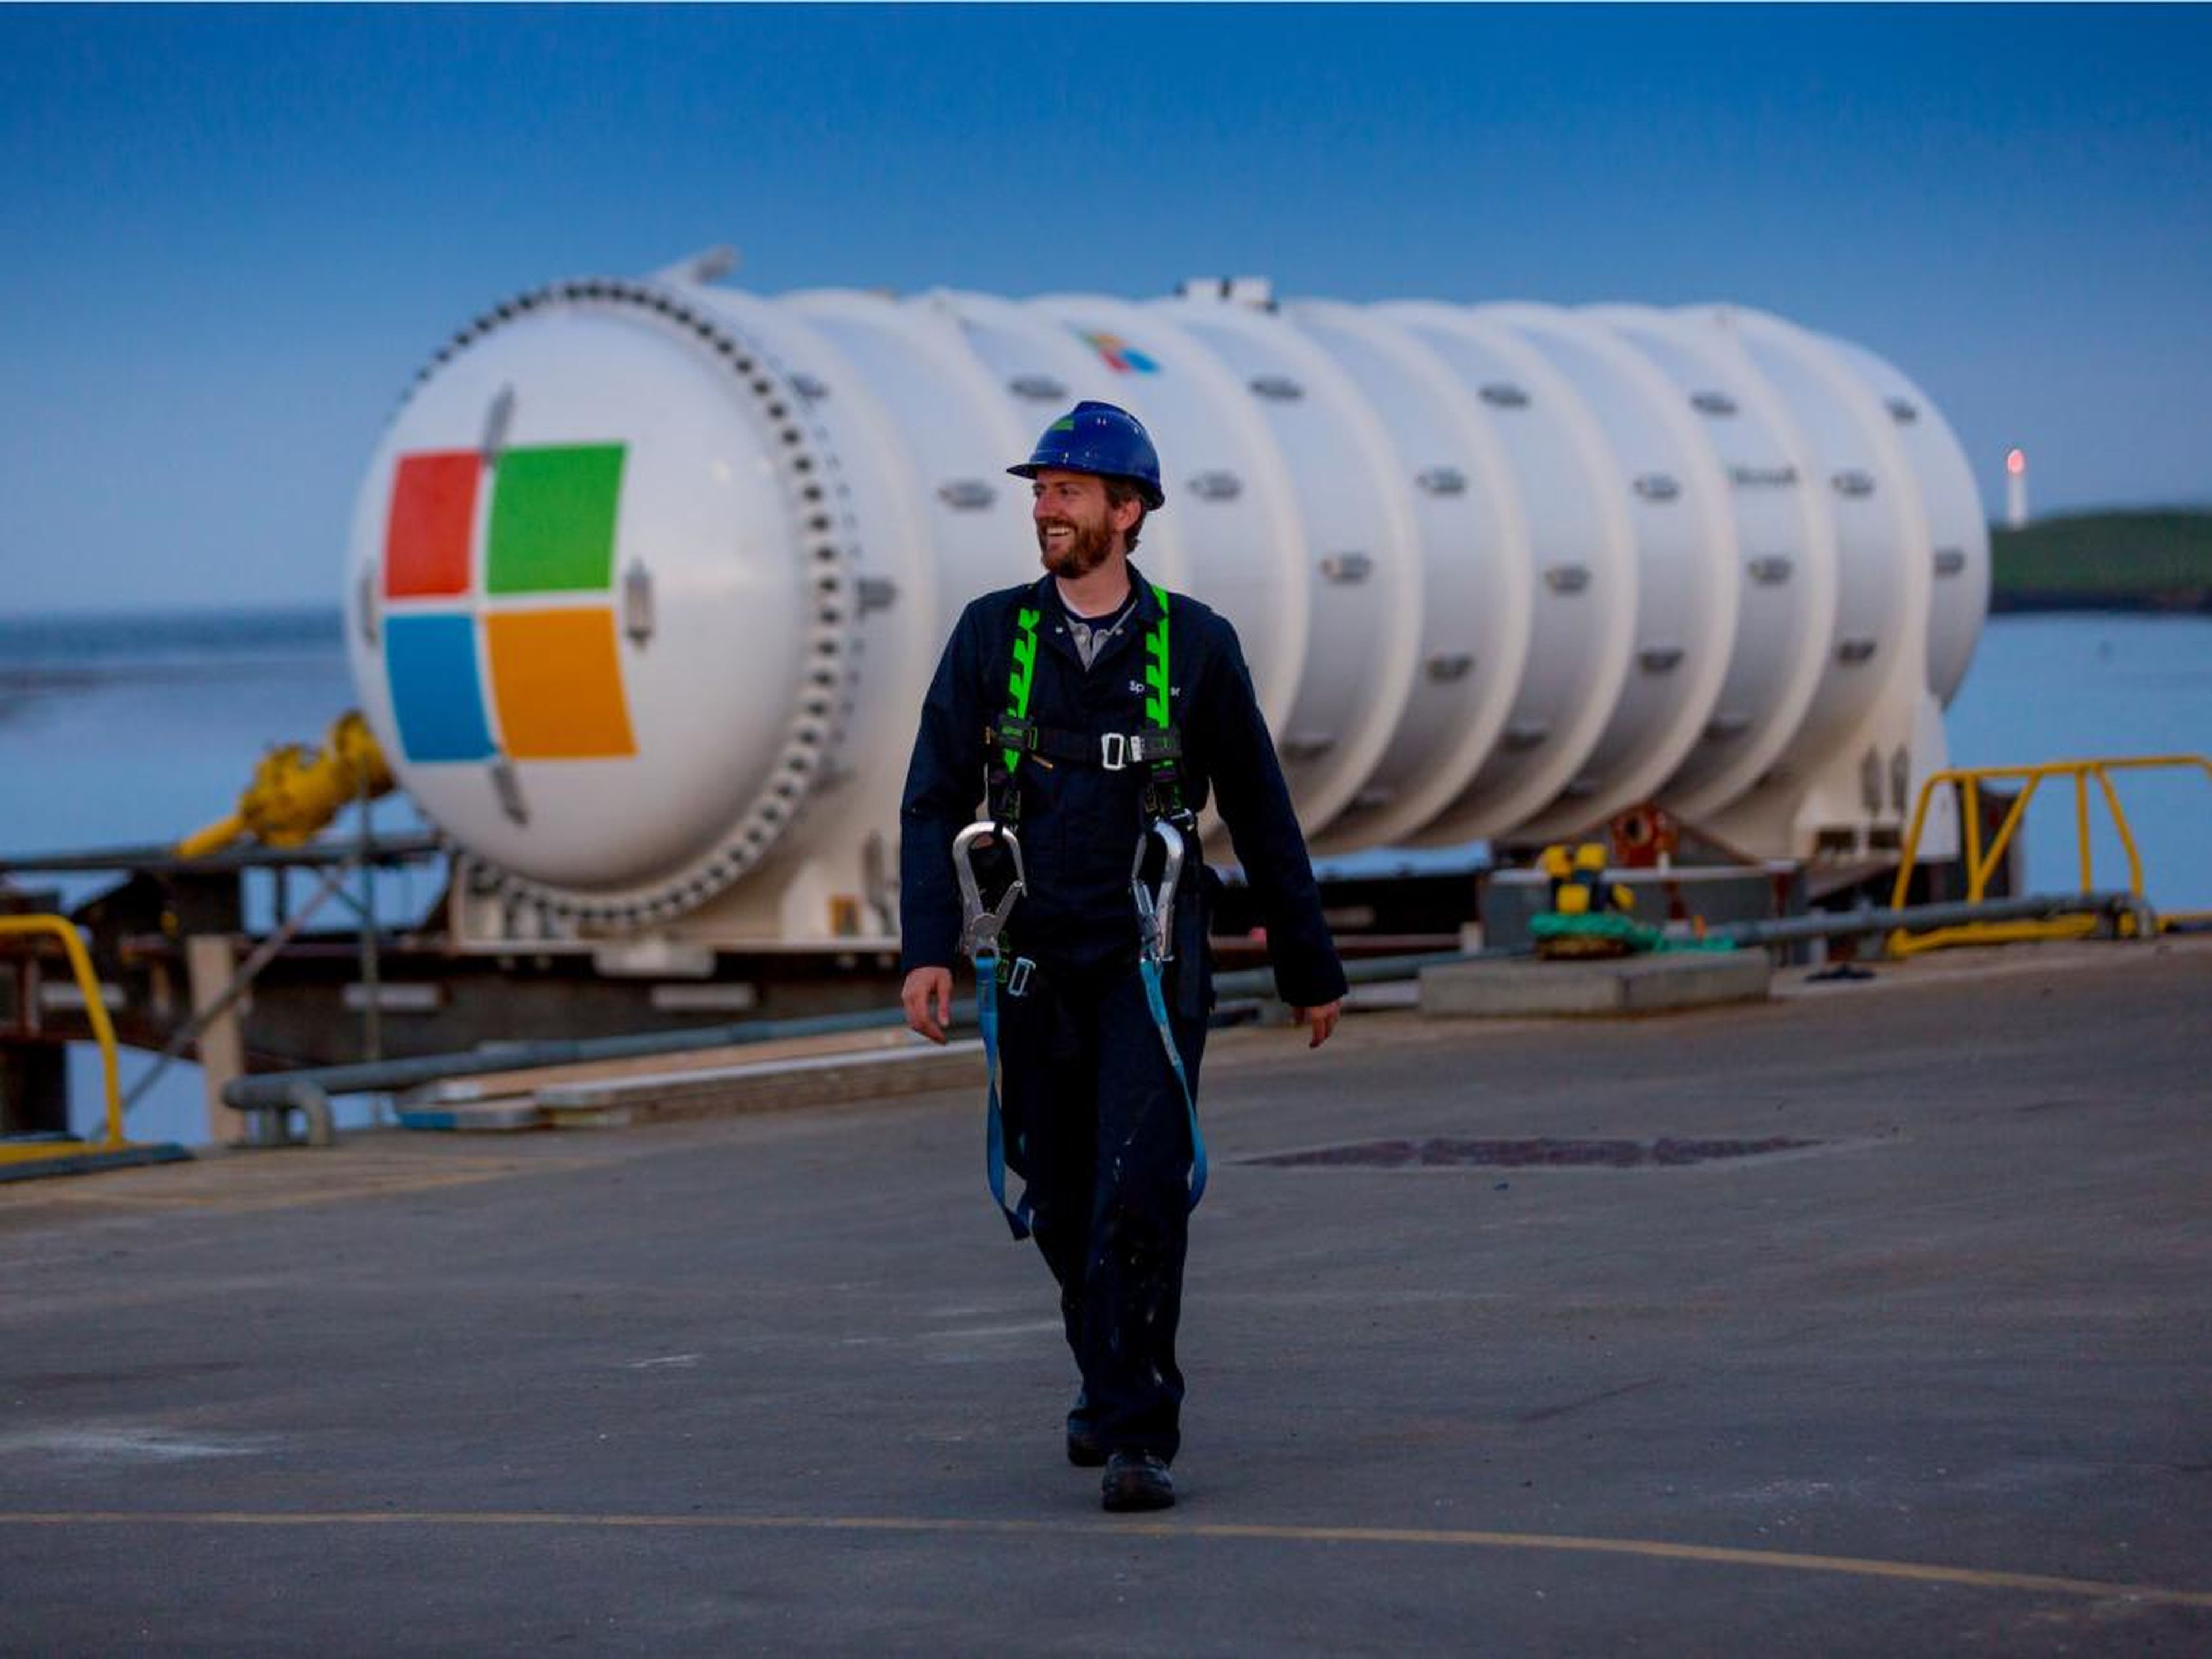 A Microsoft employee first came up with the idea of an underwater data centre in a whitepaper, and the company's artificial intelligence and research division took on the project in 2014. Data centres are the internet's backbone,